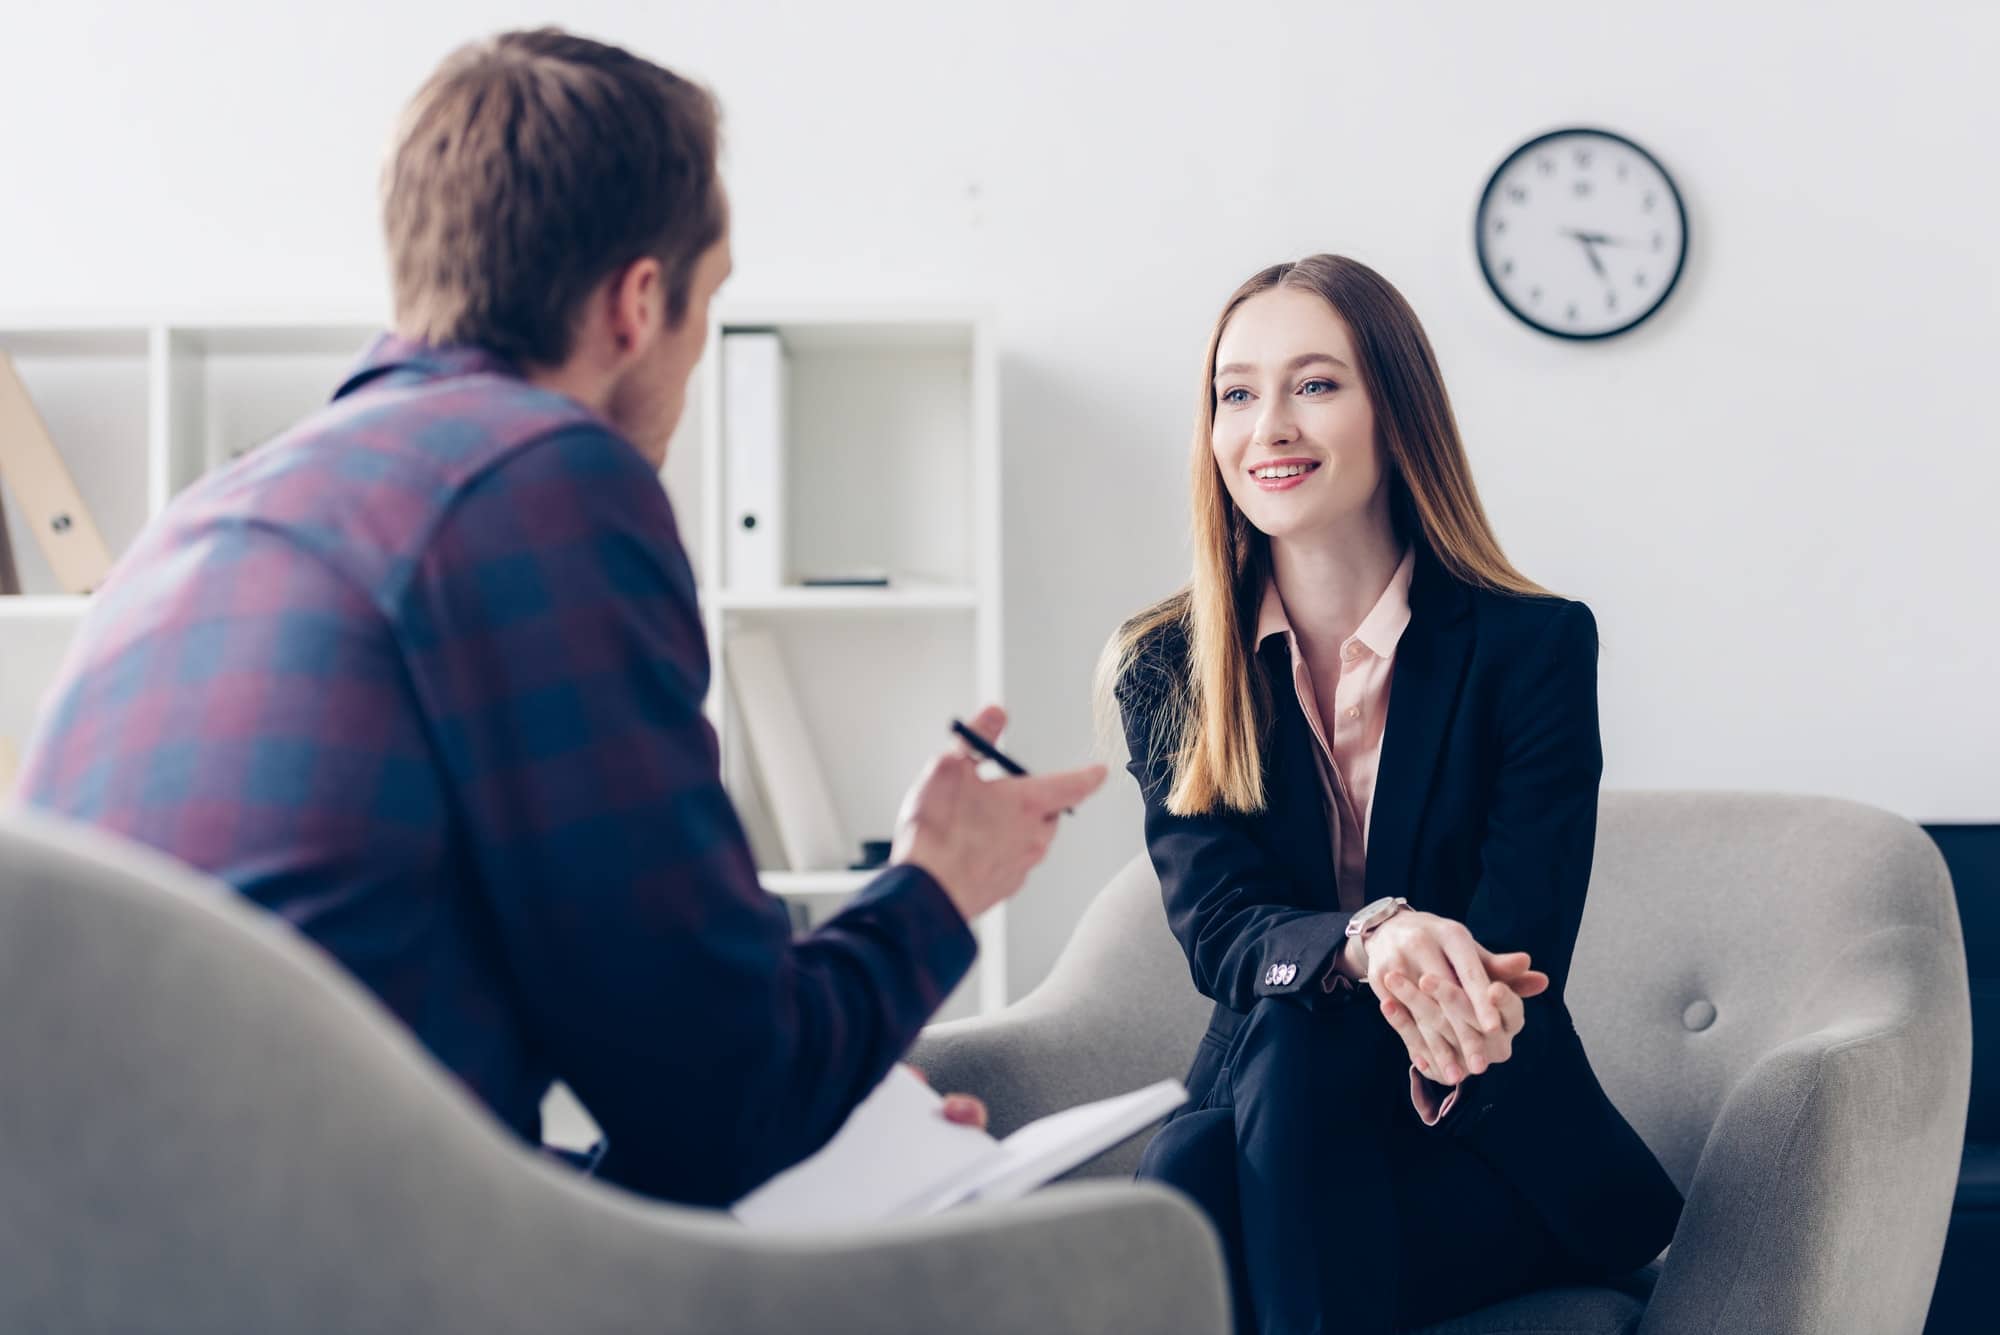 happy businesswoman in suit giving interview to journalist in office